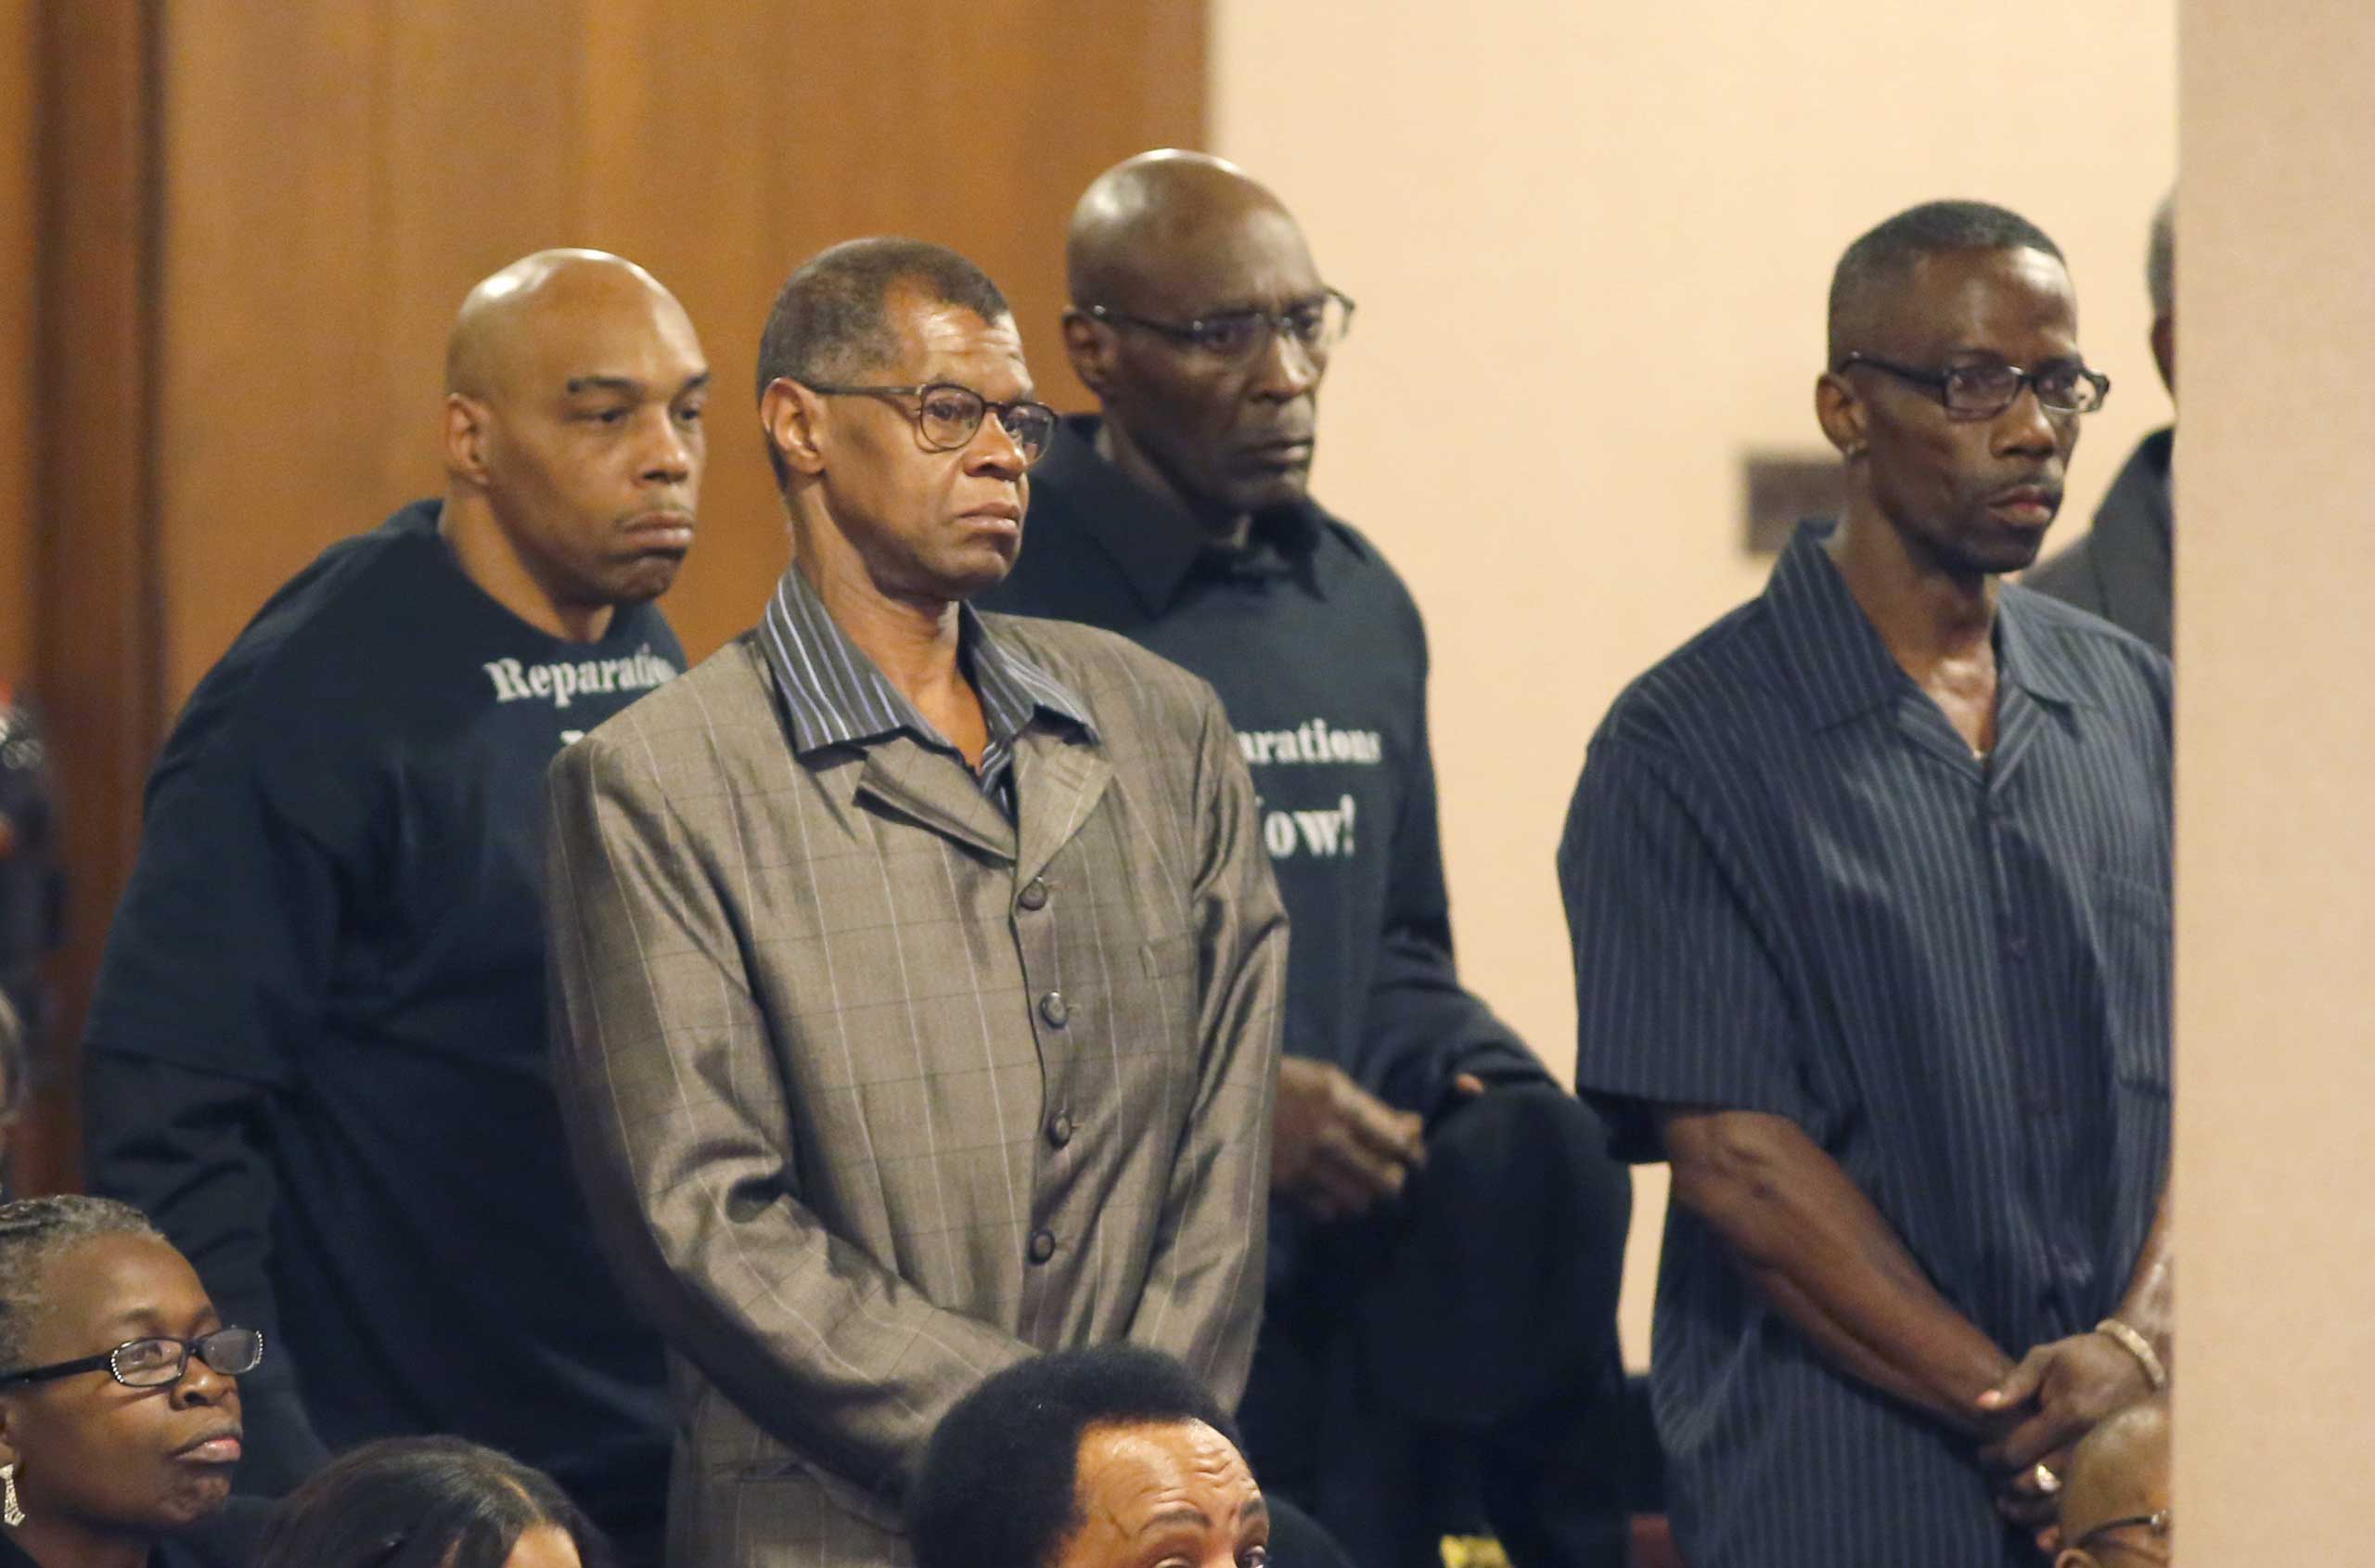 Men identified as victims of police torture under the command of retired Chicago Police Commander Jon Burge, stand to be recognized by the Chicago City Council city council, May 6, 2015, in Chicago. (Charles Rex Arbogast—AP)